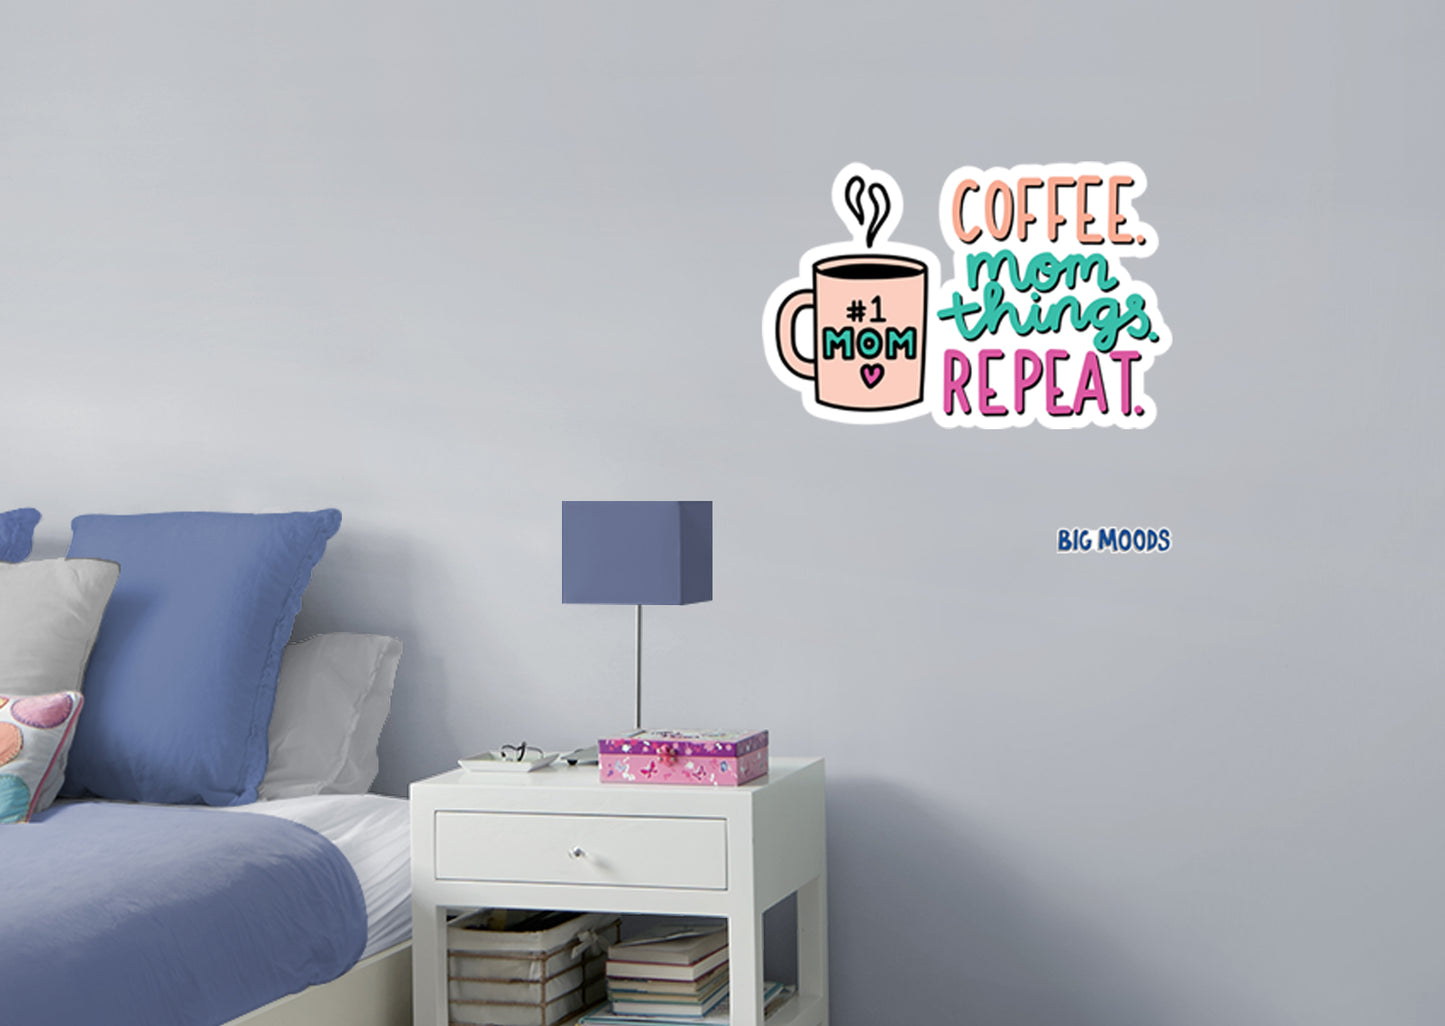 Coffee. Mom. Things. Repeat.        - Officially Licensed Big Moods Removable     Adhesive Decal